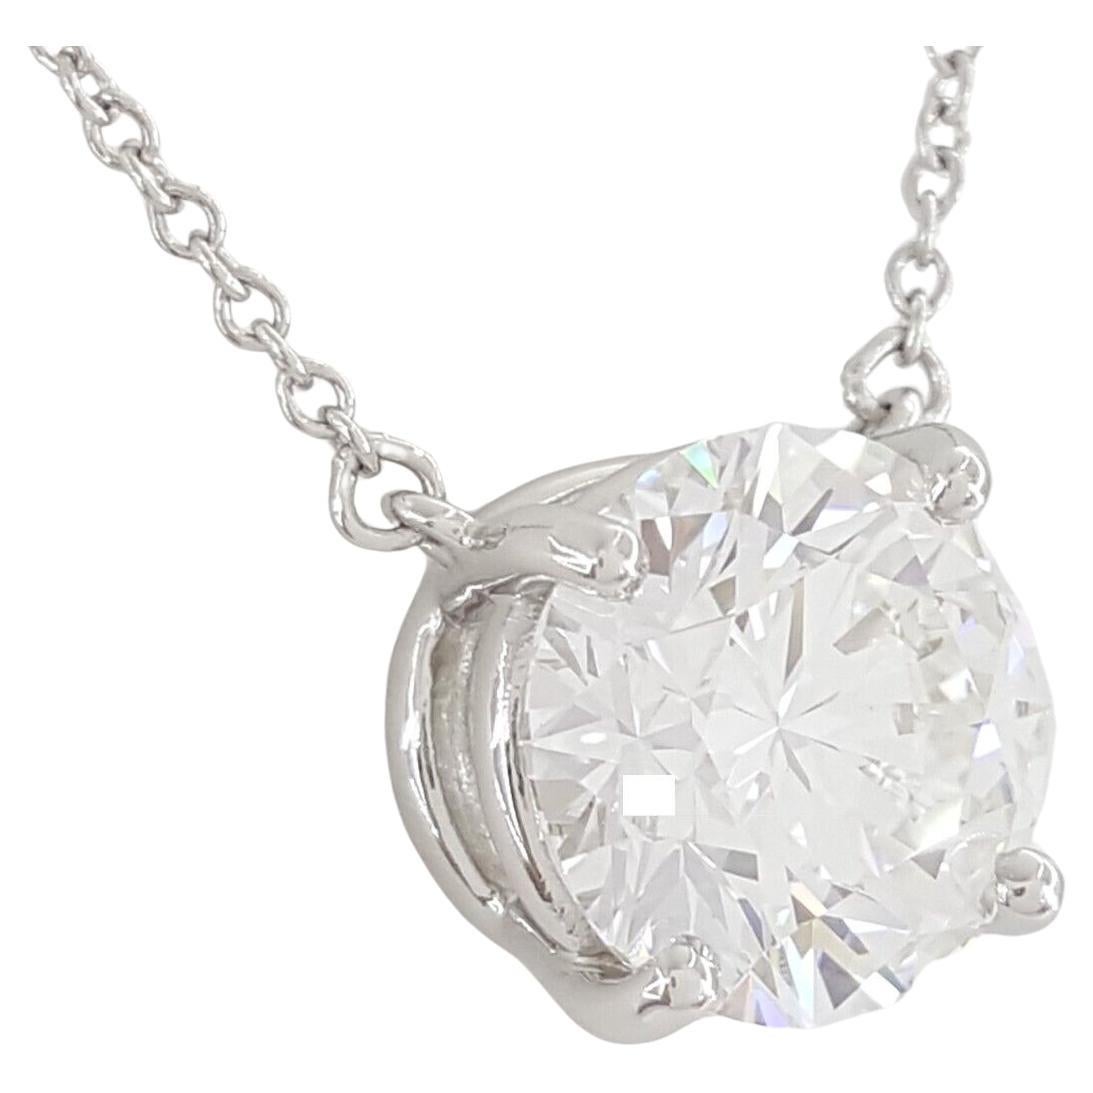 TIFFANY & CO. 2.91 ct Round Brilliant Cut Diamond Solitaire Pendant.



 The Pendant & Chain weigh 4.5 grams, the diamond is a natural 2.91 ct Round Brilliant Cut, E in color, VVS2 in clarity. Excellent Cut, Very Good Polish & Very Good Symmetry,